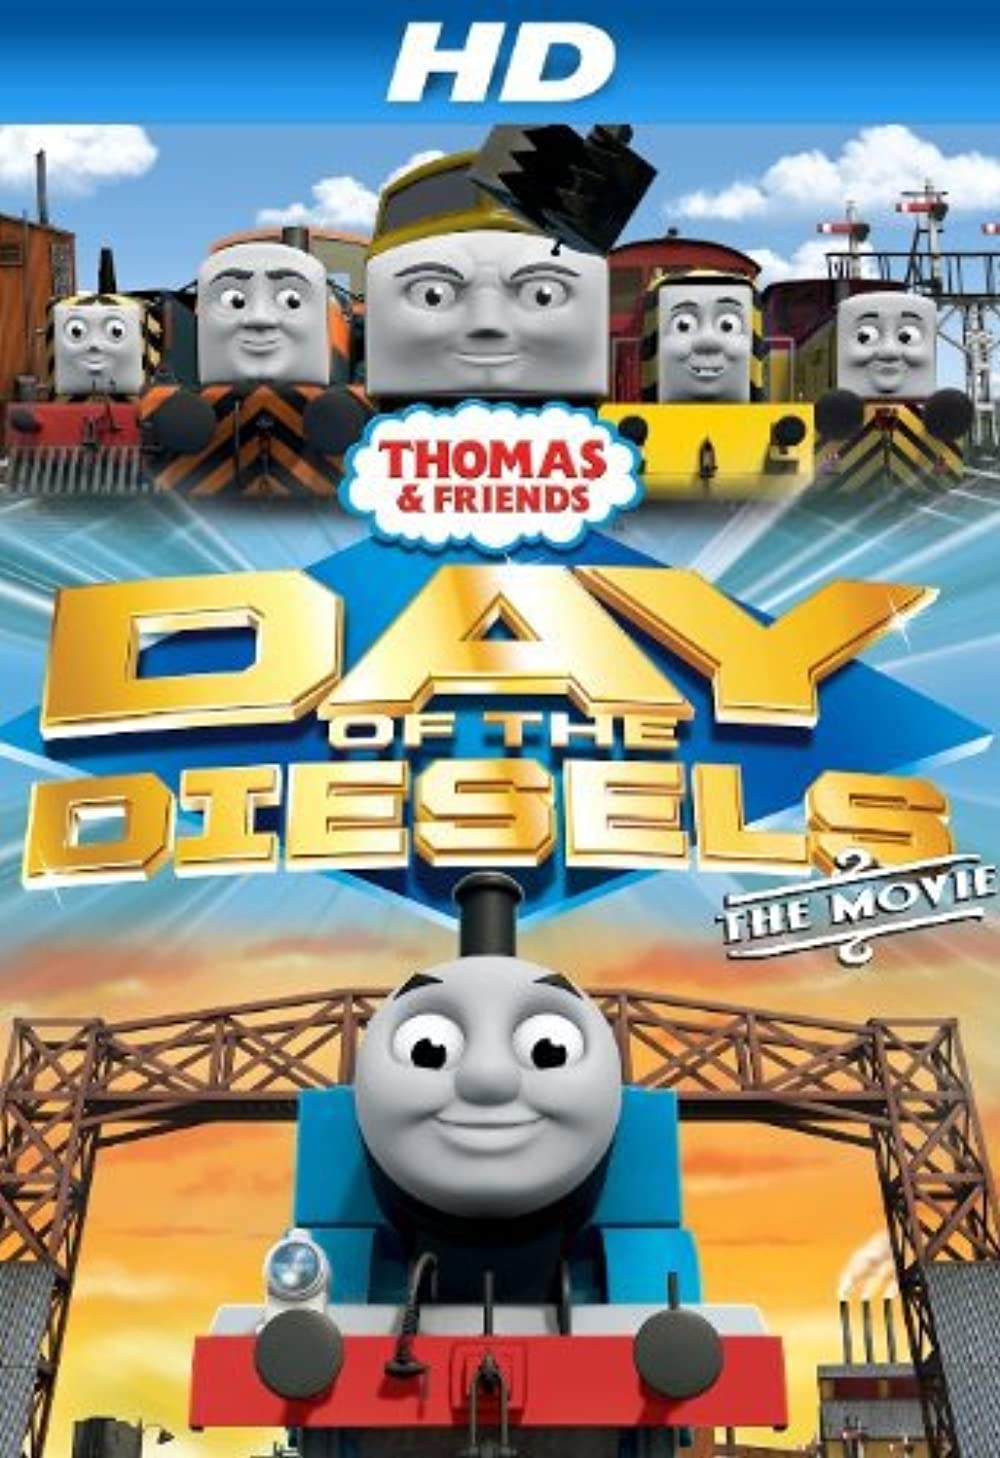 Download Thomas & Friends: Day of the Diesels Movie | Watch Thomas & Friends: Day Of The Diesels